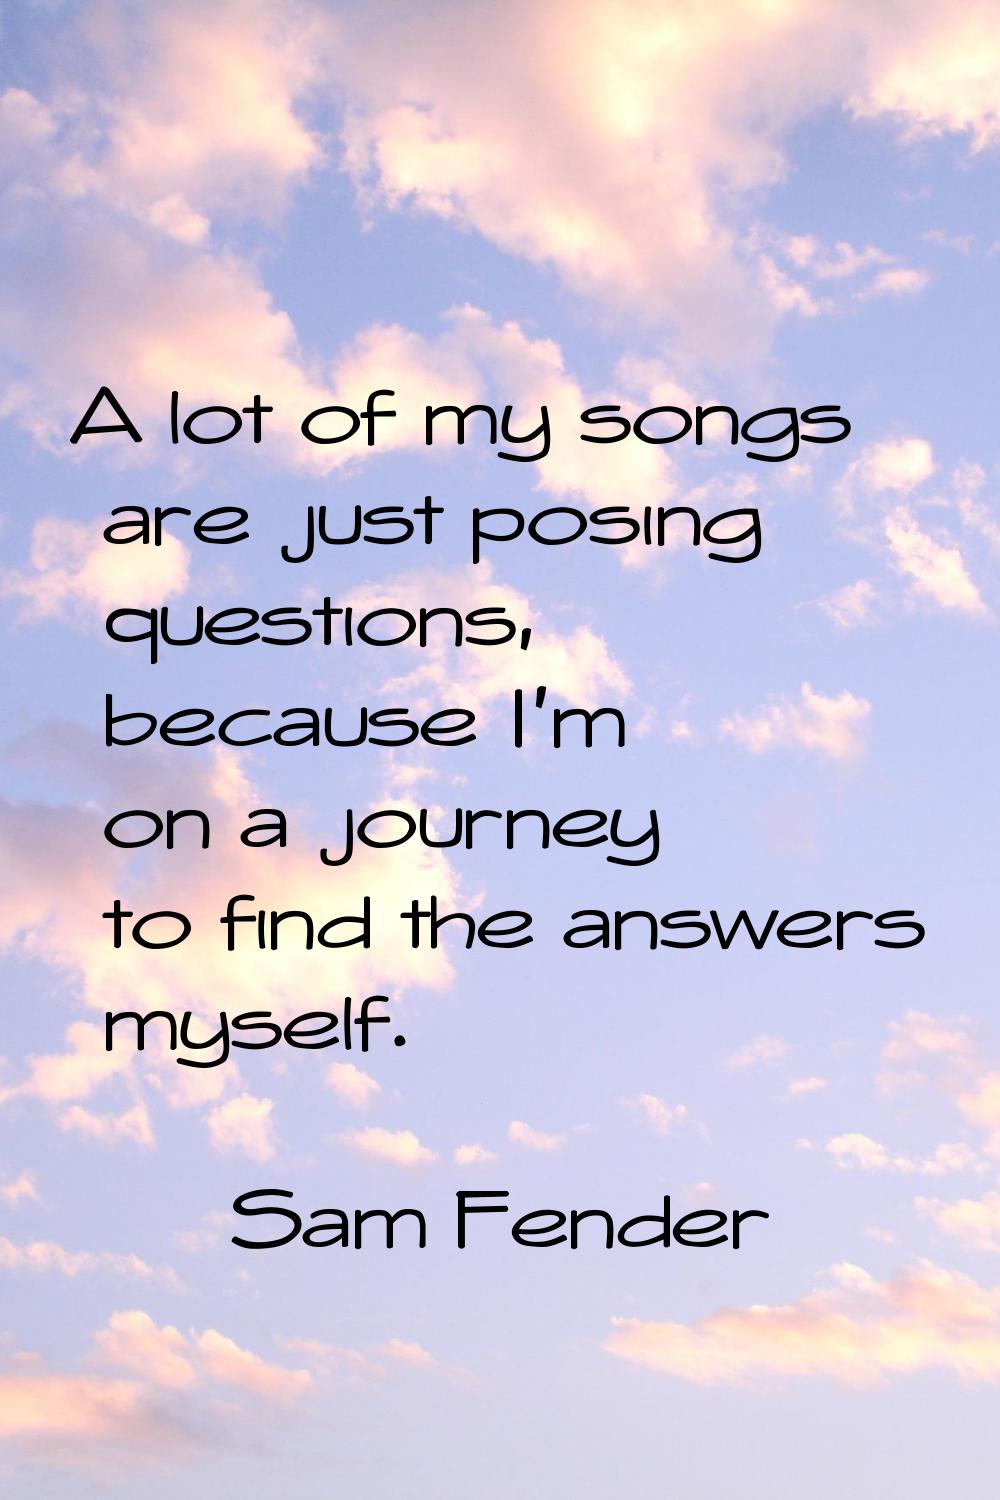 A lot of my songs are just posing questions, because I'm on a journey to find the answers myself.